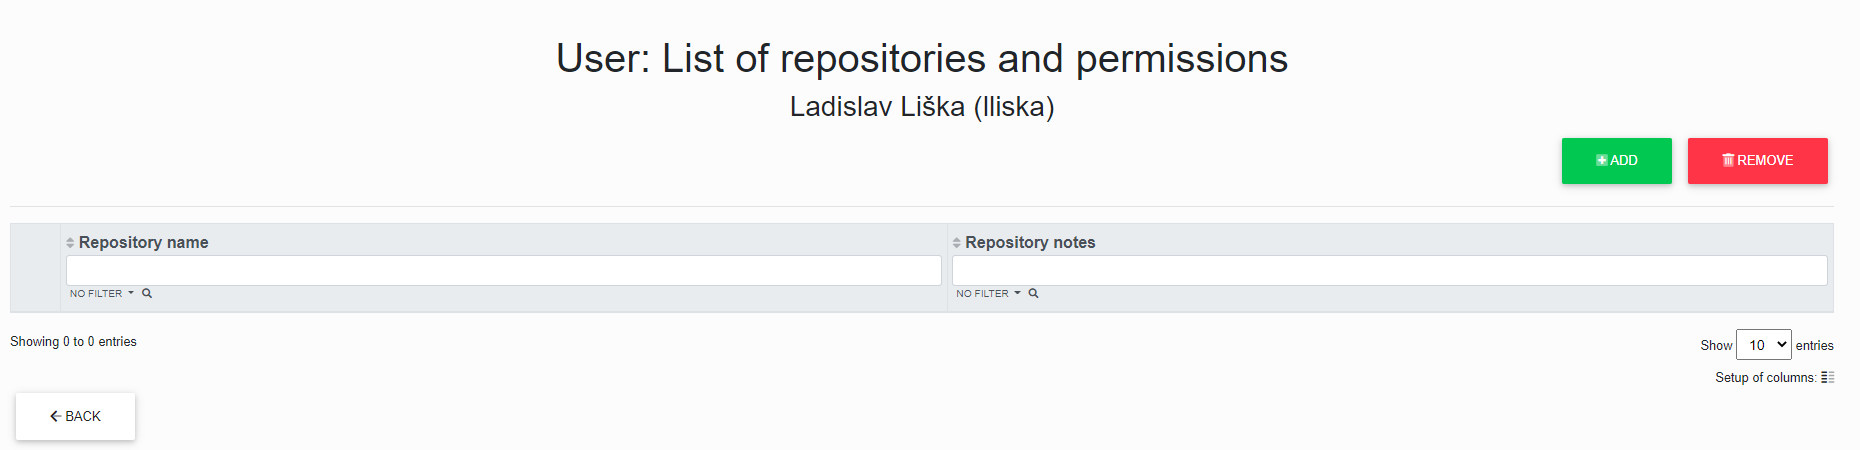 repositories repositories1.png